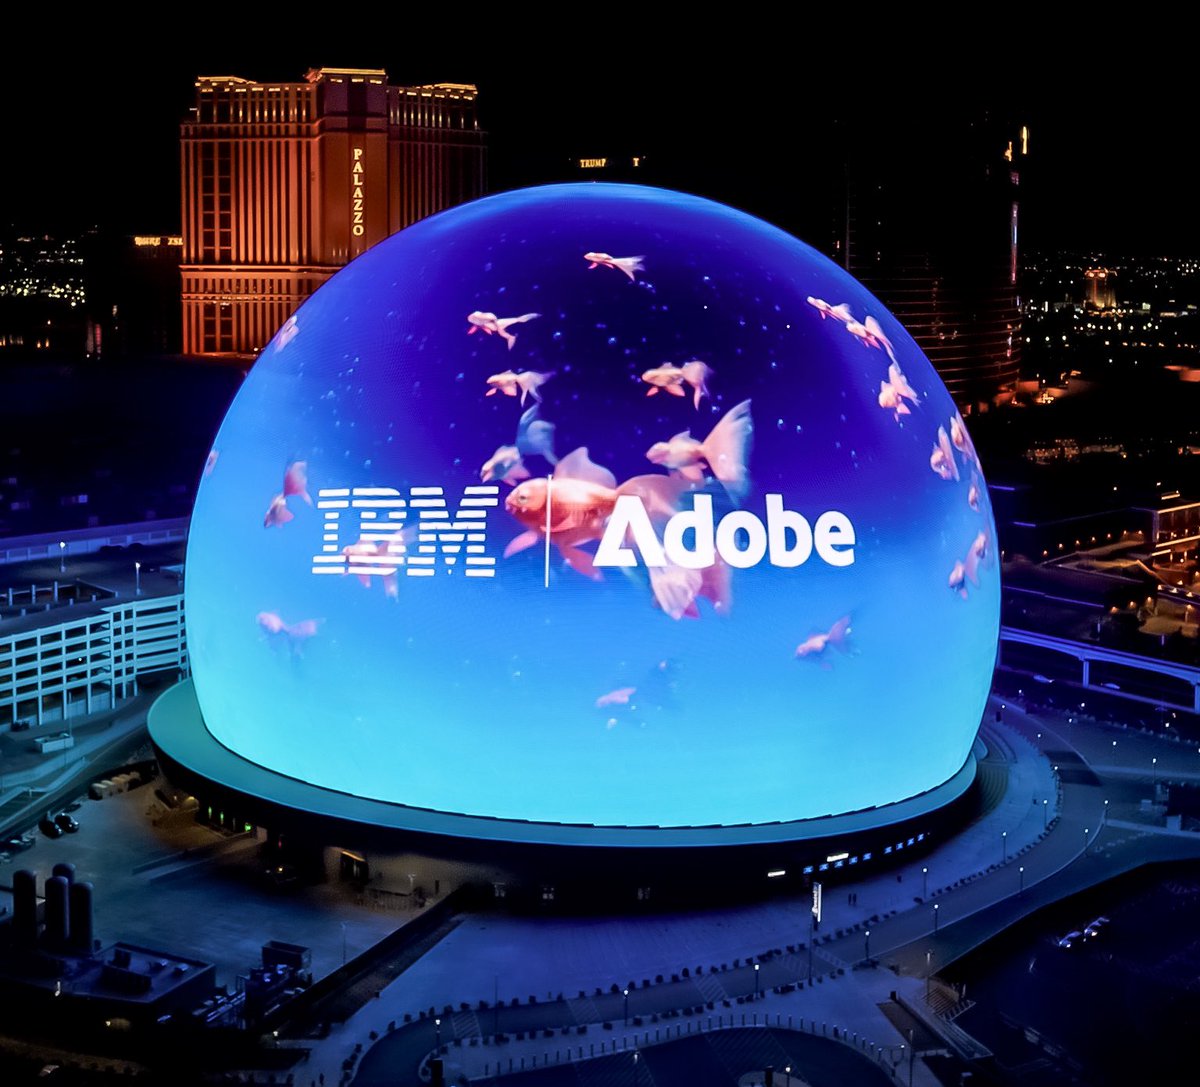 😀 @IBM takes over the @SphereVegas to catch fishy AI. We are explaining IBM's trusted AI technology with a goldfish bowl. w3.ibm.com/w3publisher/w3…